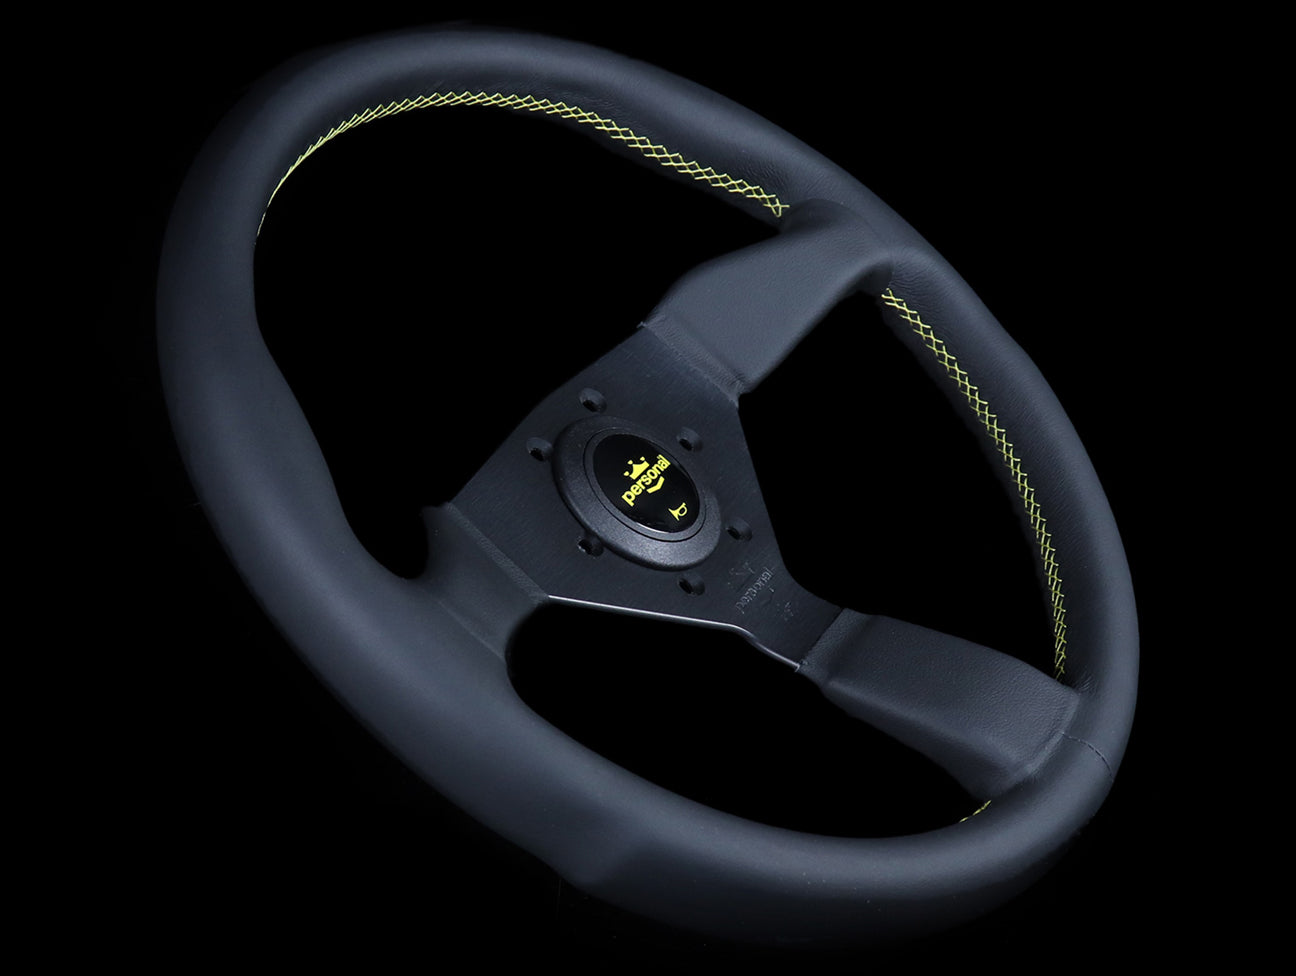 Personal Grinta 330mm Steering Wheel - Black Leather / Yellow Stitch